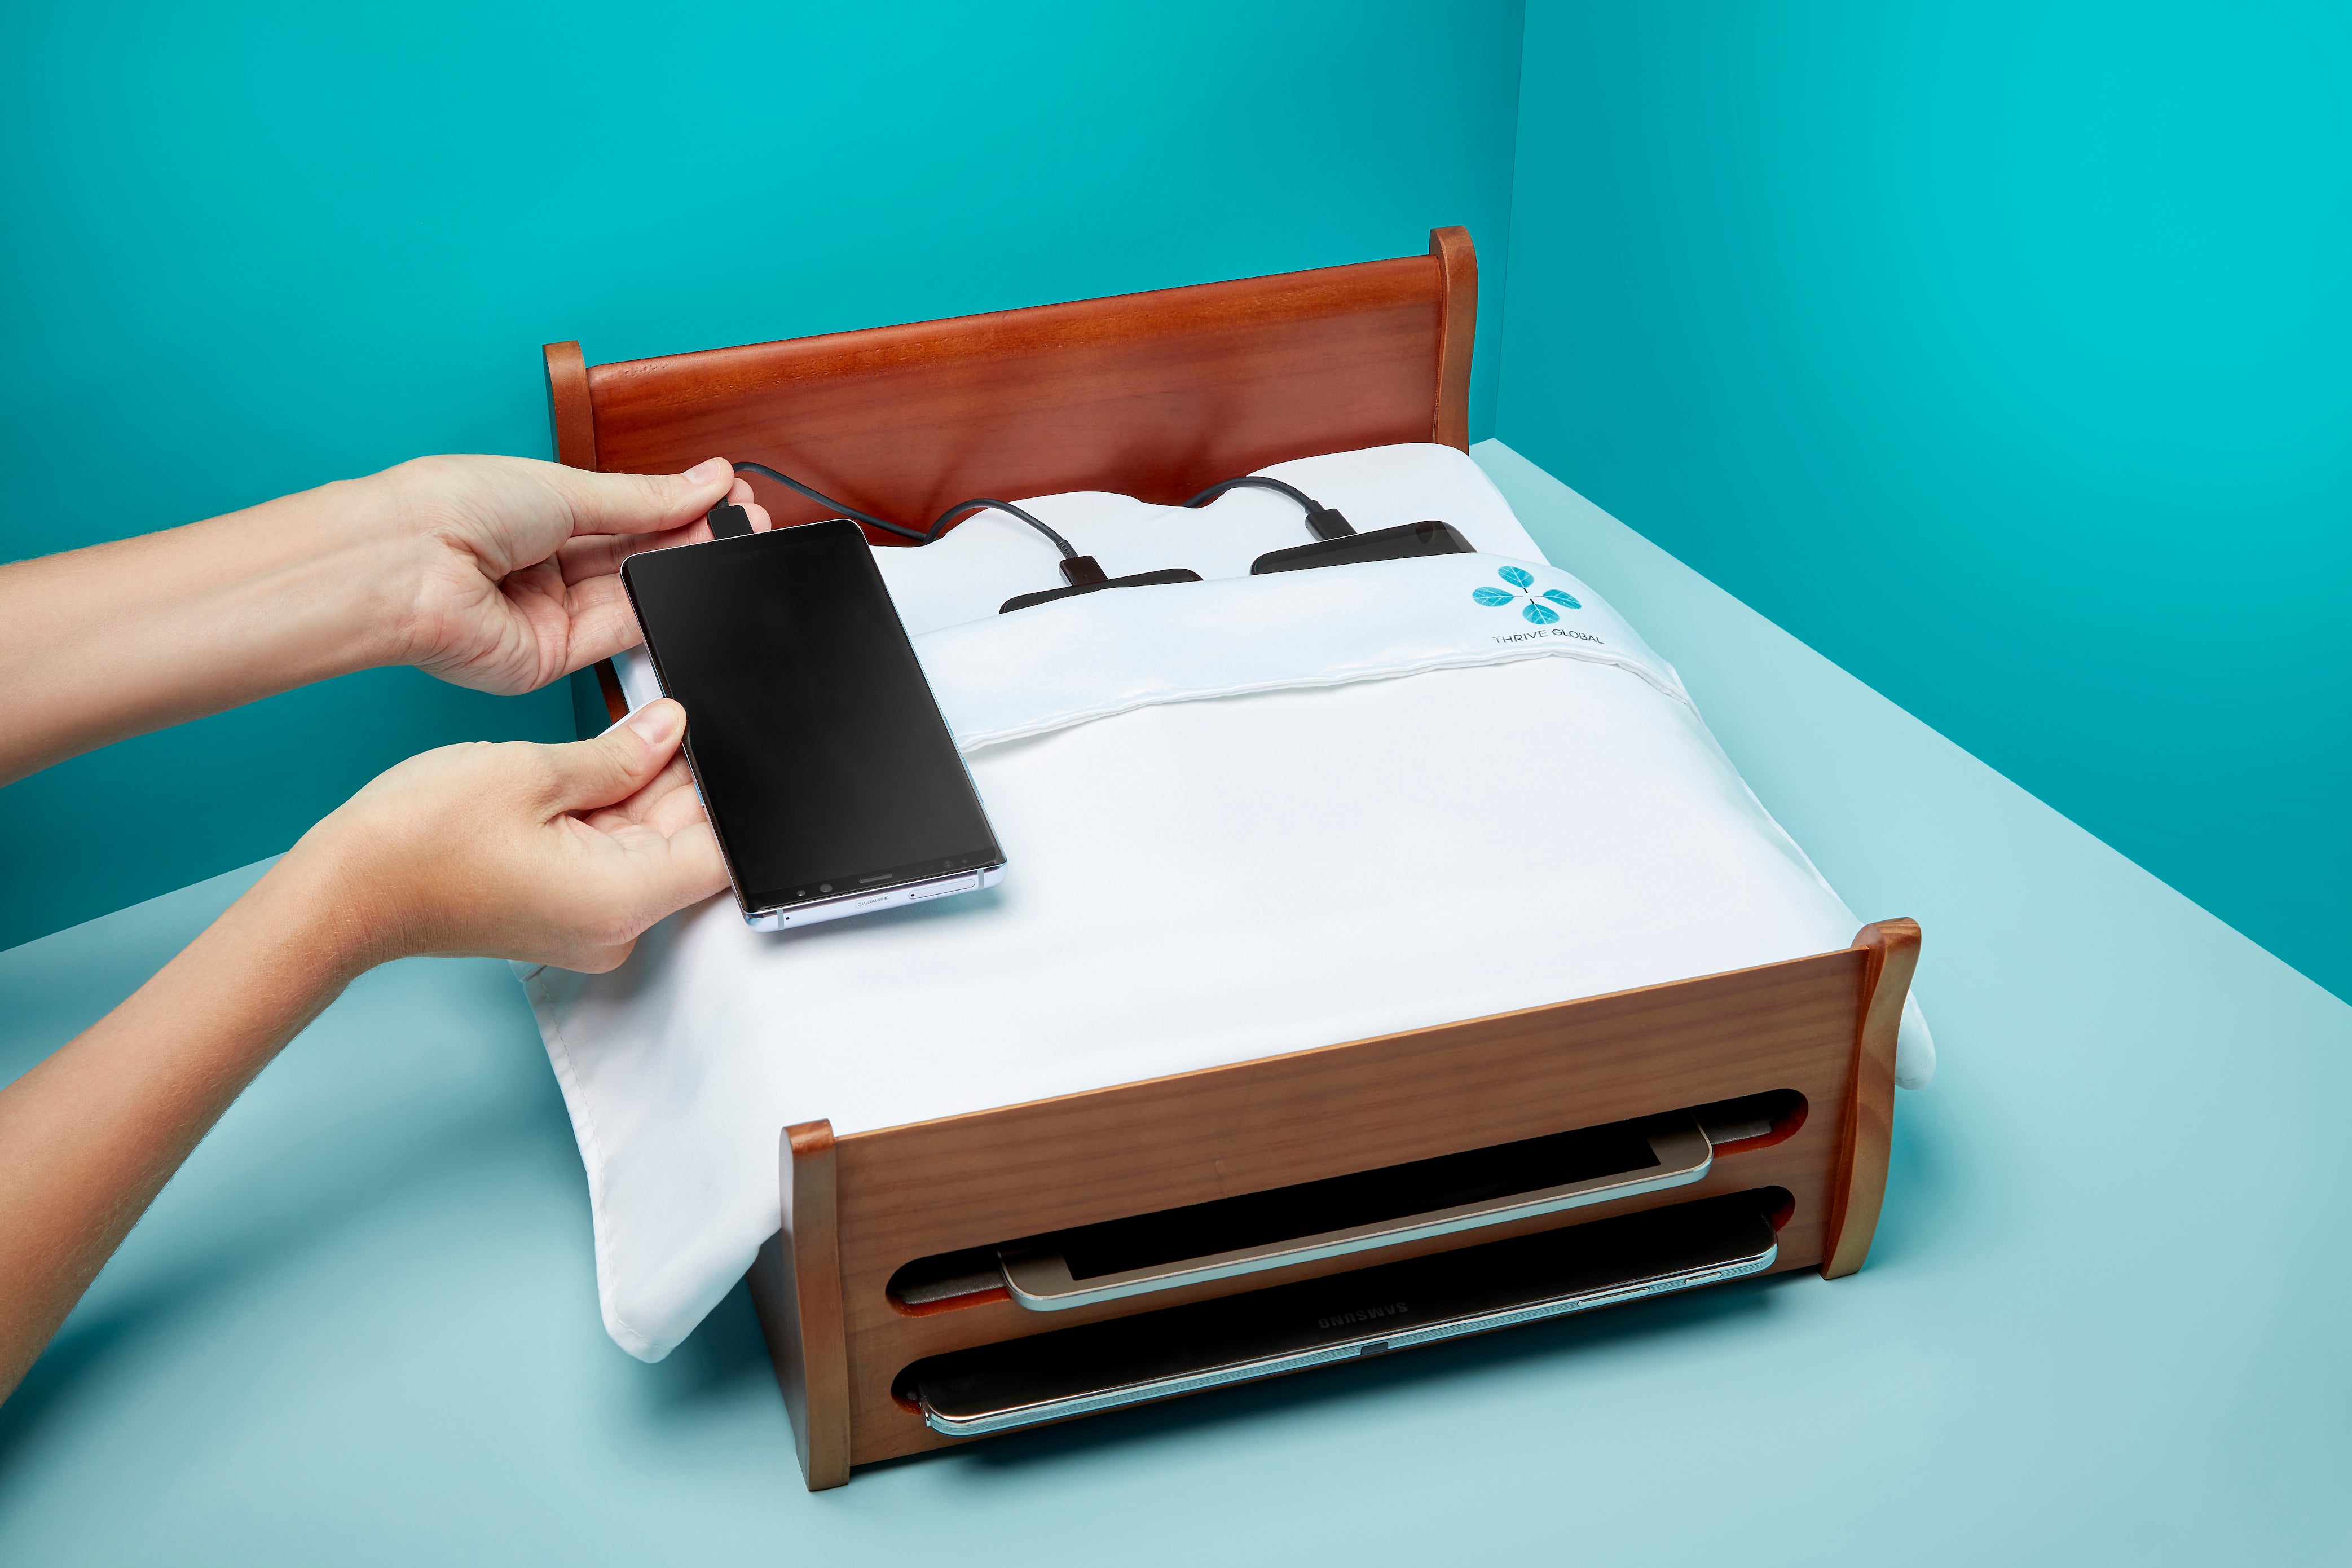 Arianna Huffington's Phone Bed Charging Station, brought to you by Thrive Global